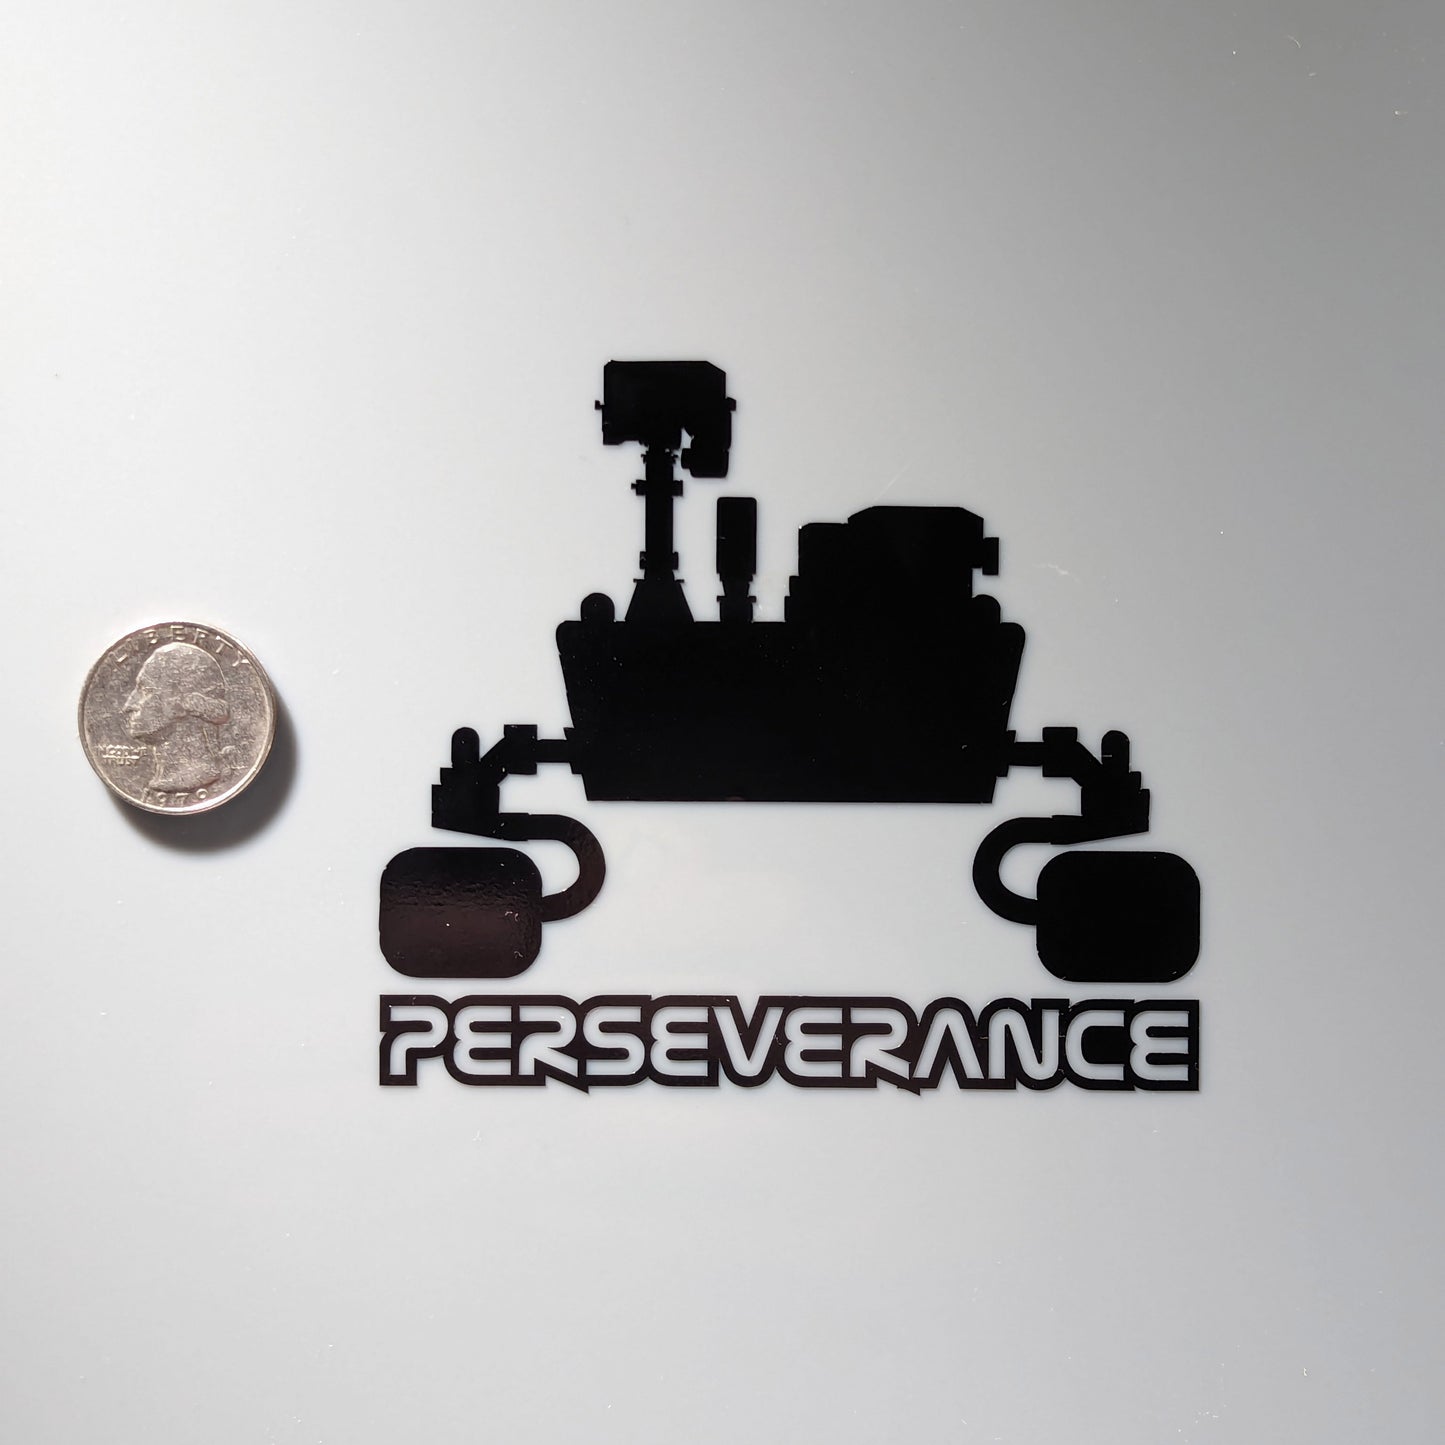 Perseverance Mars Rover Decal (Small)